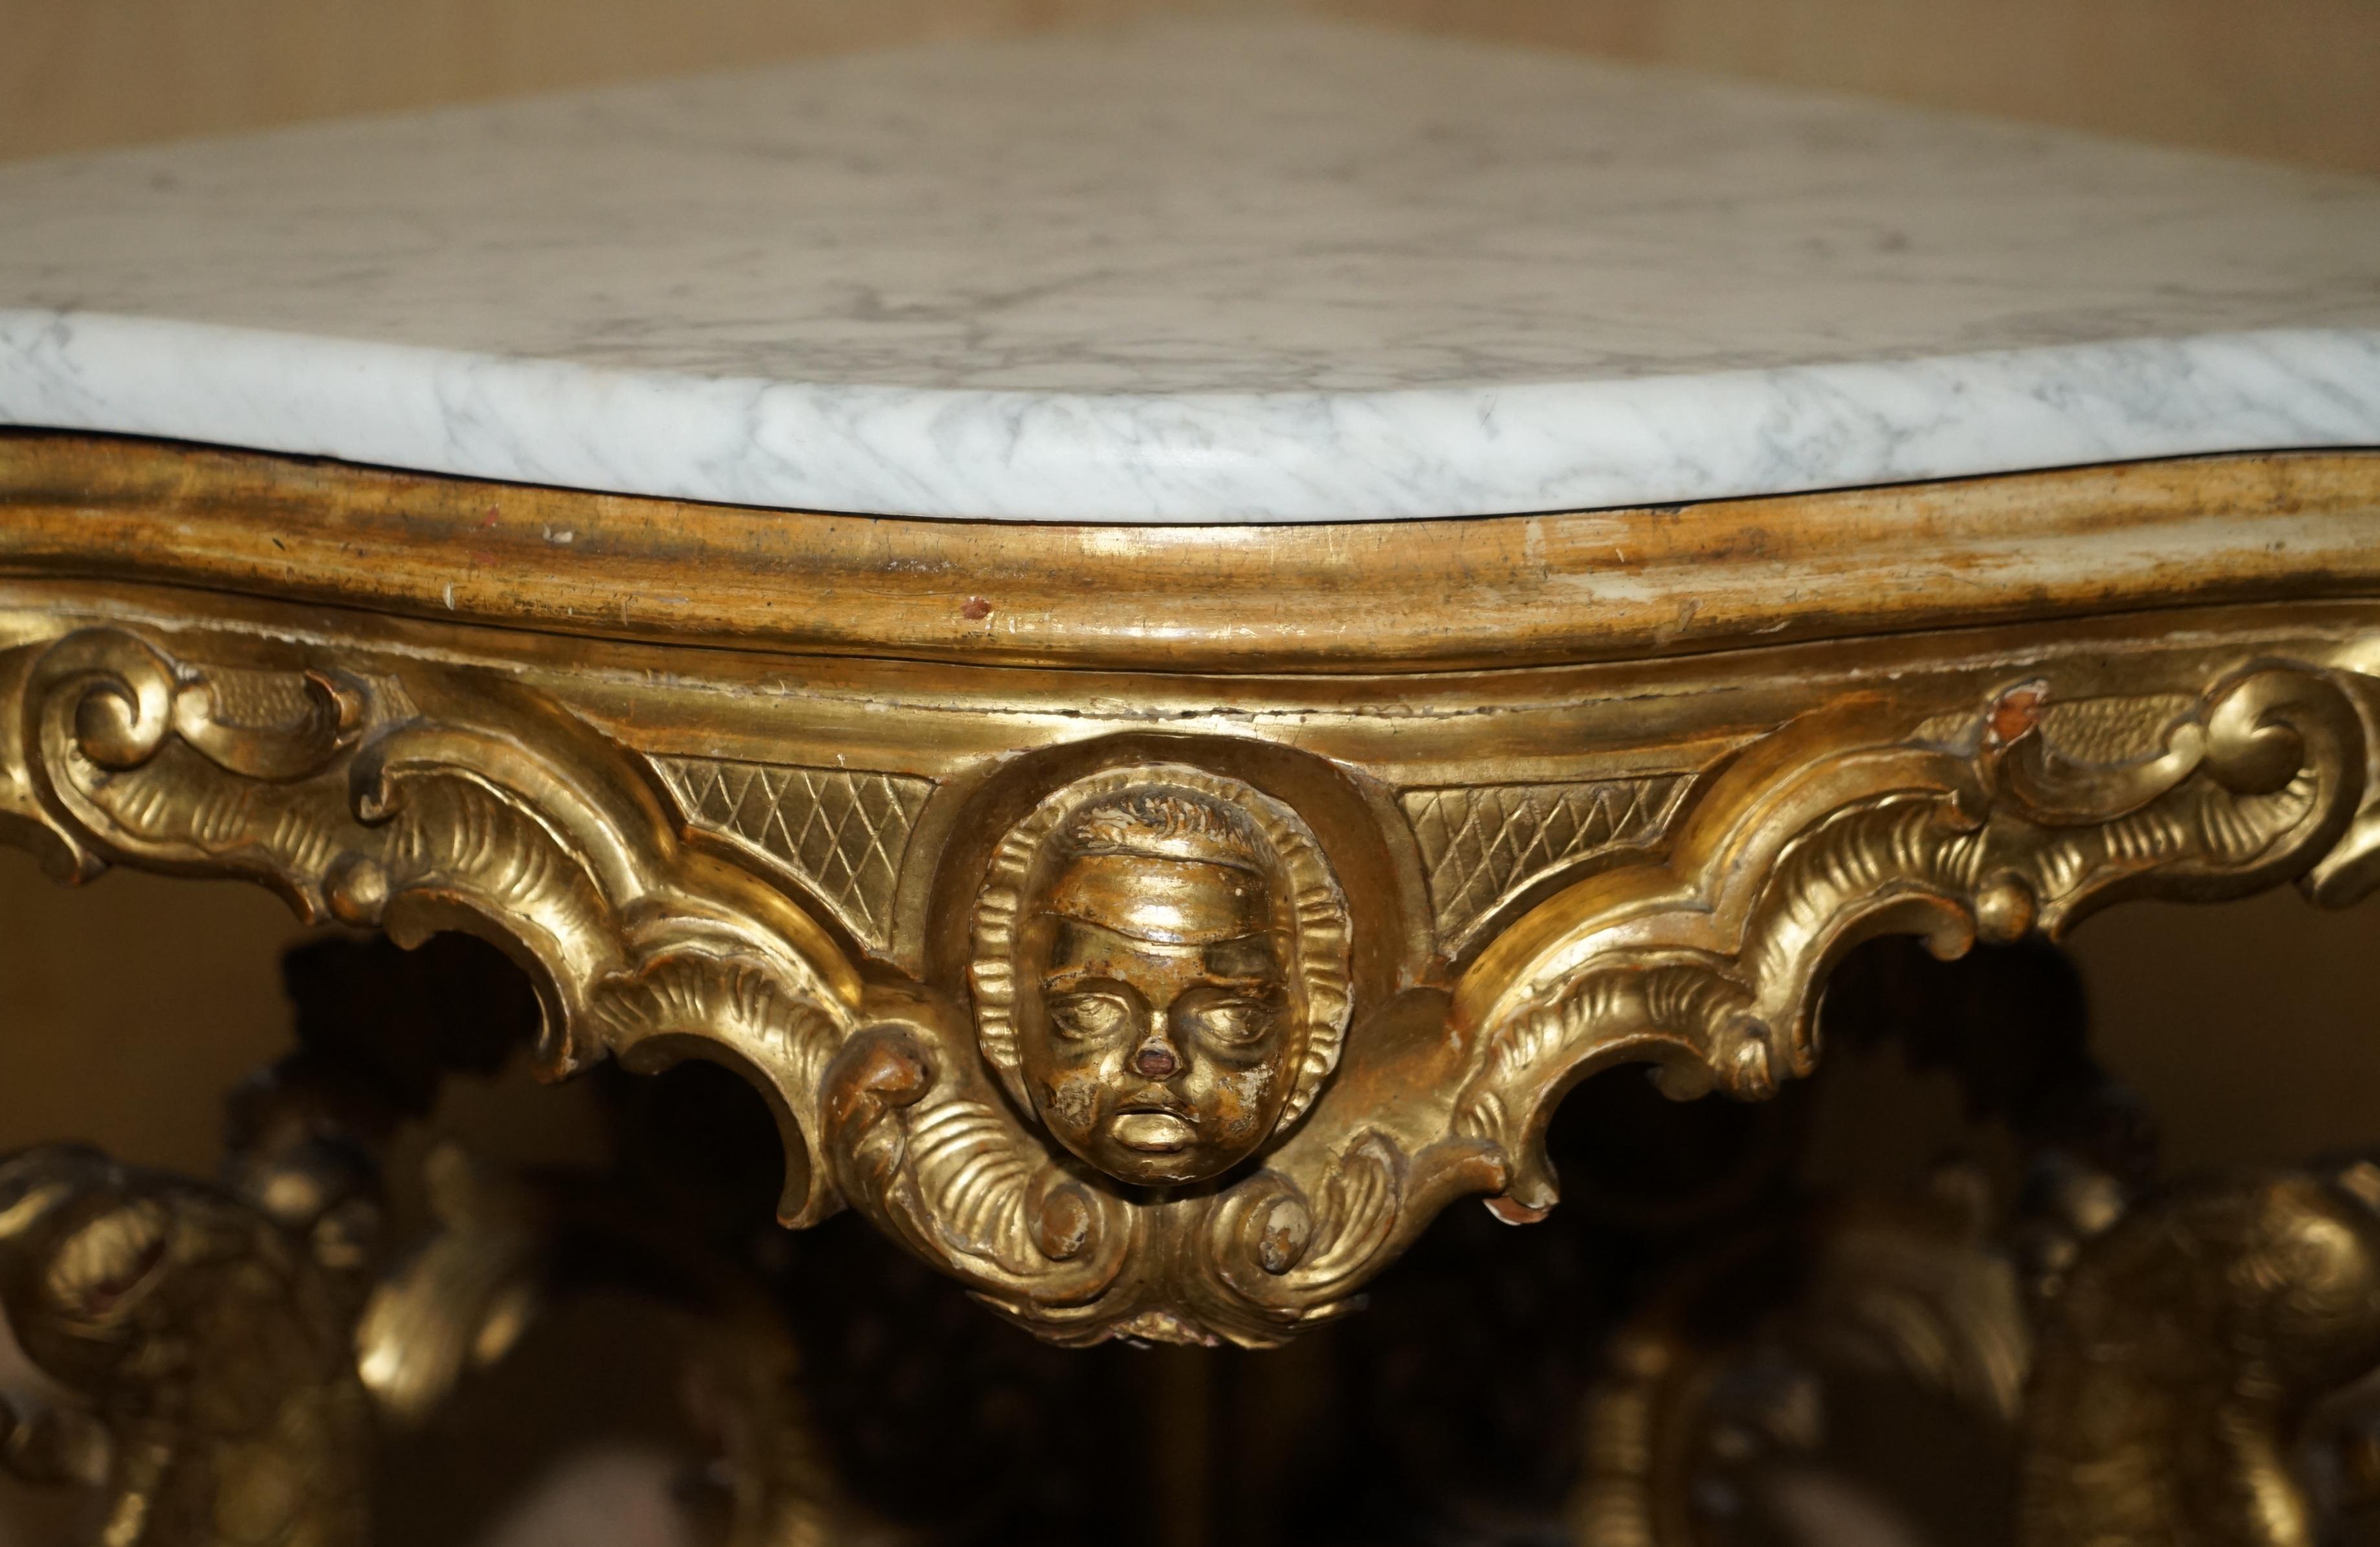 Exquisite Antique Italian Gold Giltwood Italian Marble Herm Carved Corner Table For Sale 1